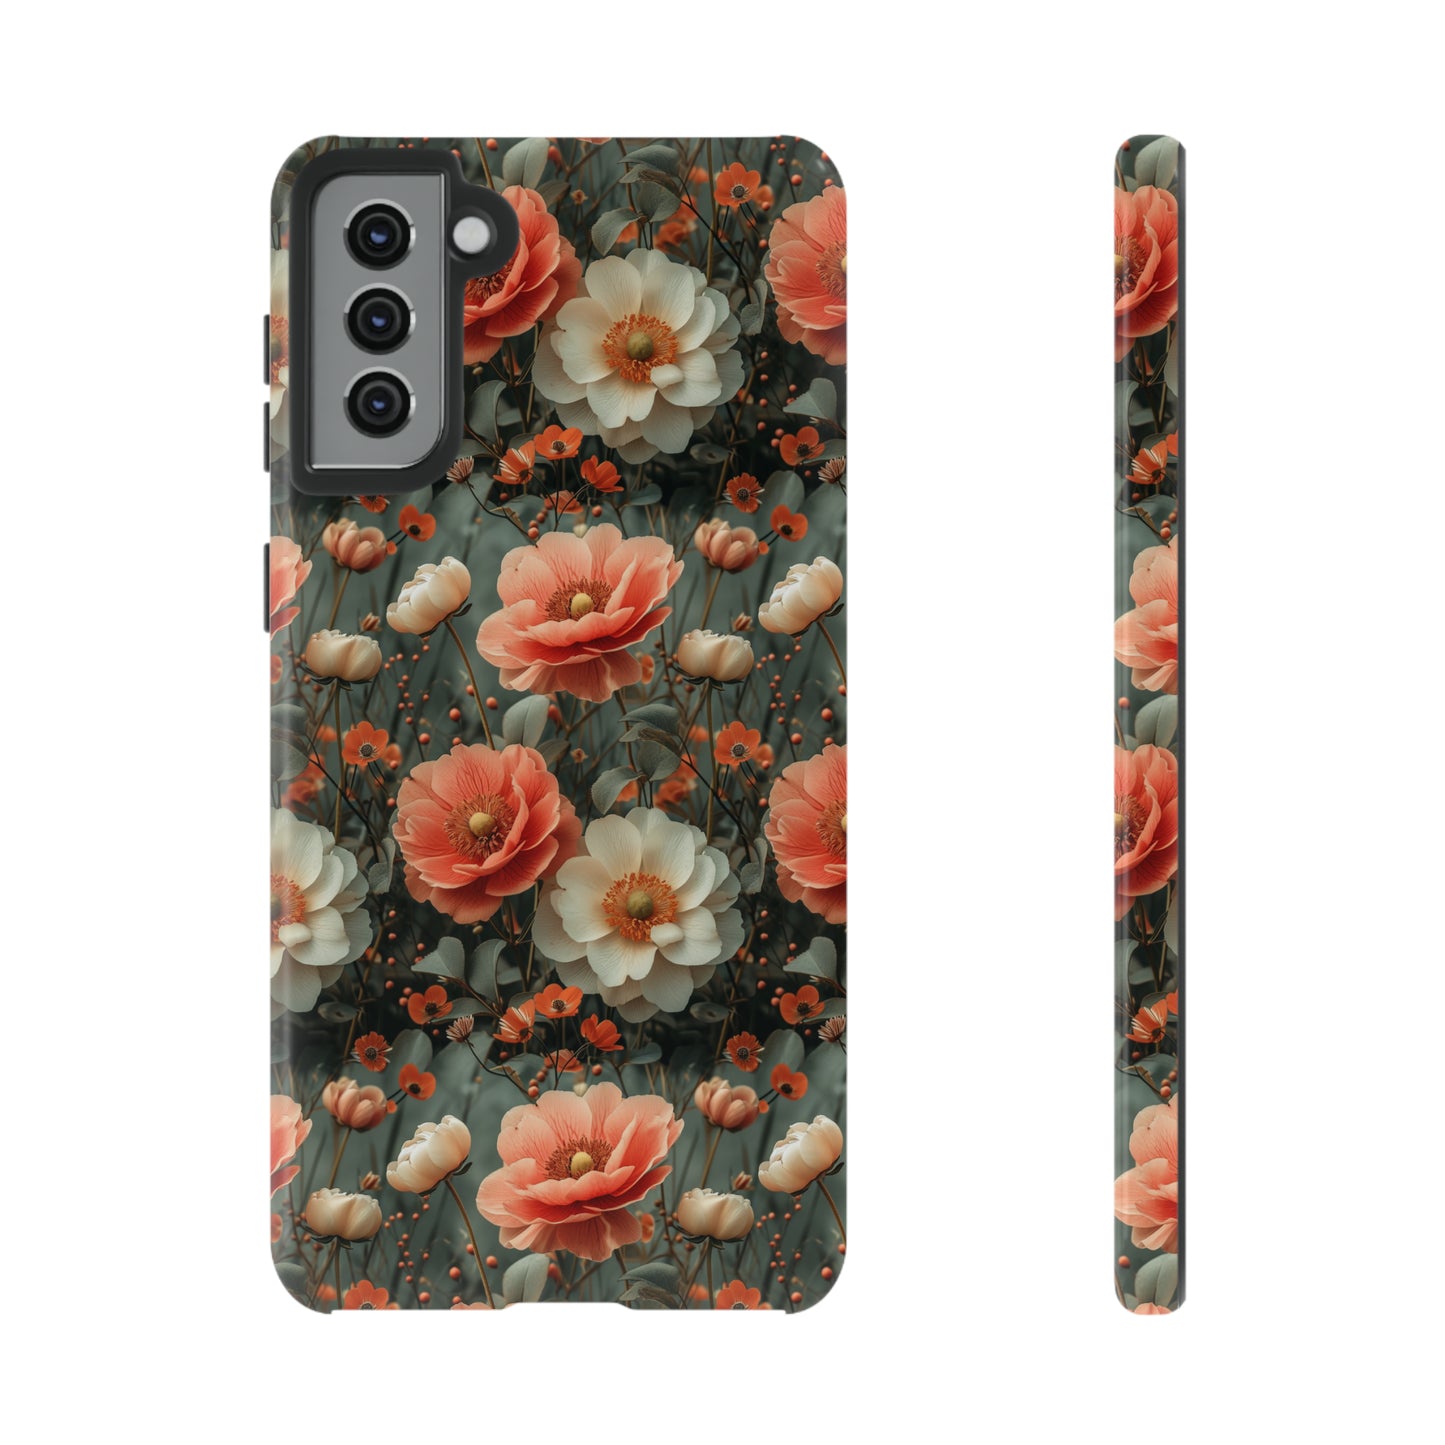 Elegant Peach Flowers Protective Cover, Botanical Garden print design Tough Phone Case compatible with a large variety of Samsung models